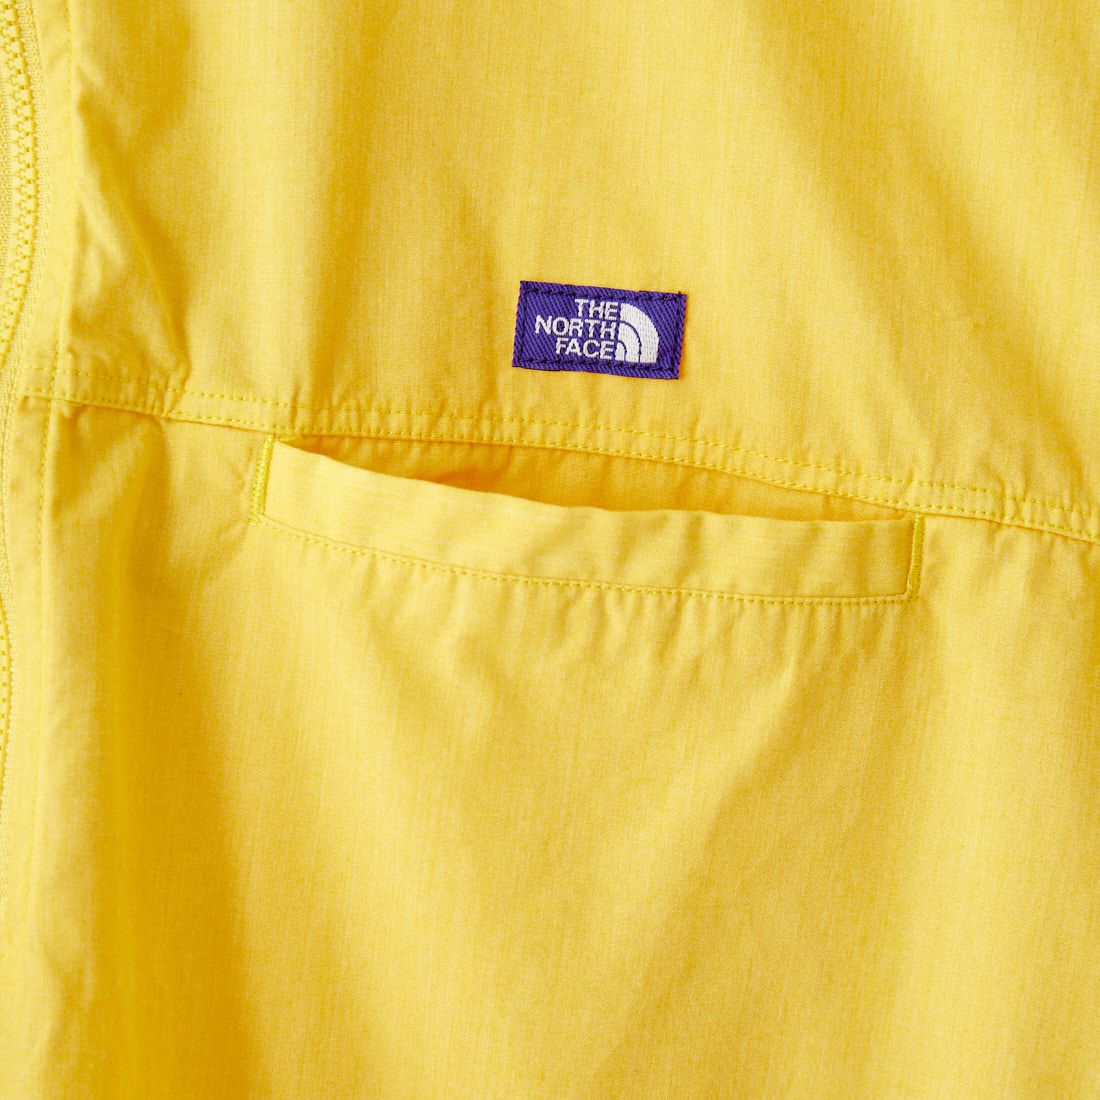 THE NORTH FACE PURPLE LABEL Y YELLOW